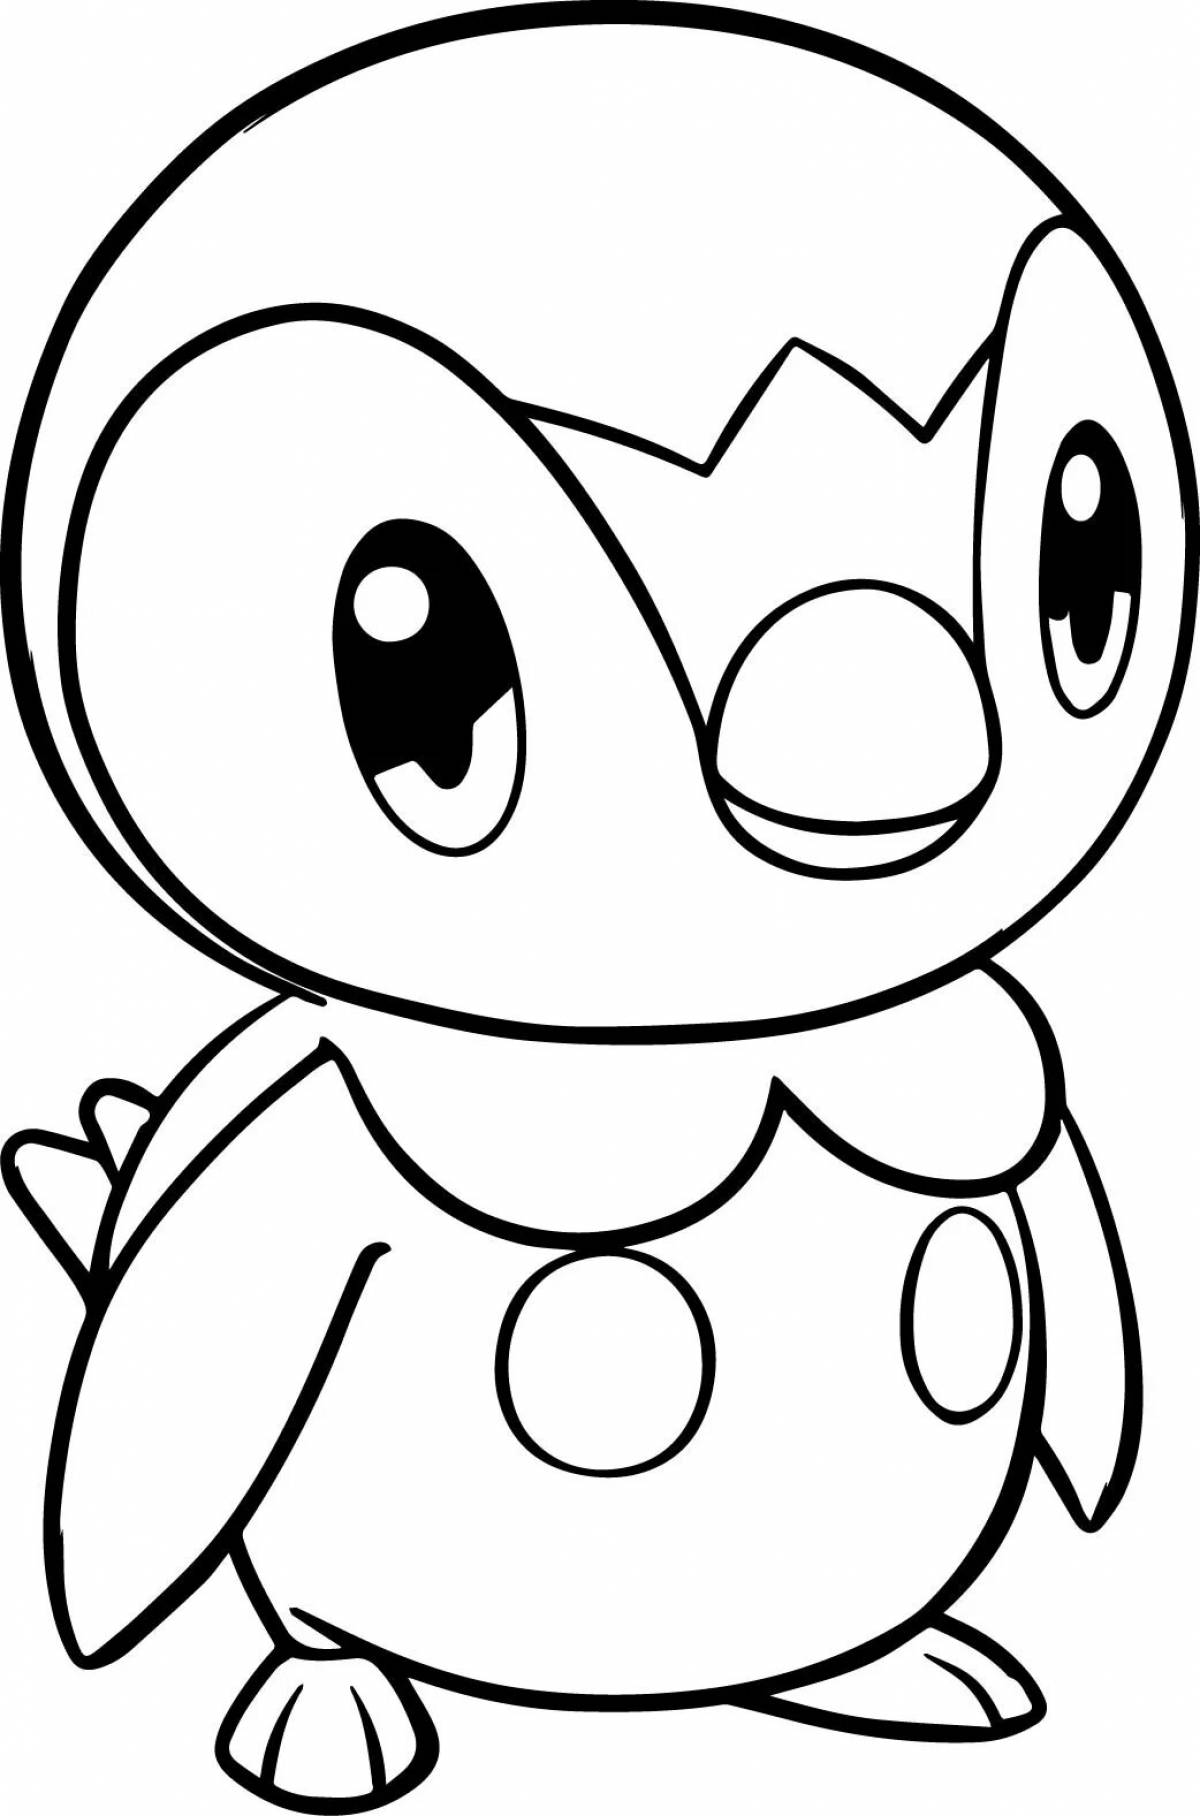 Pokemon coloring page refined piplap